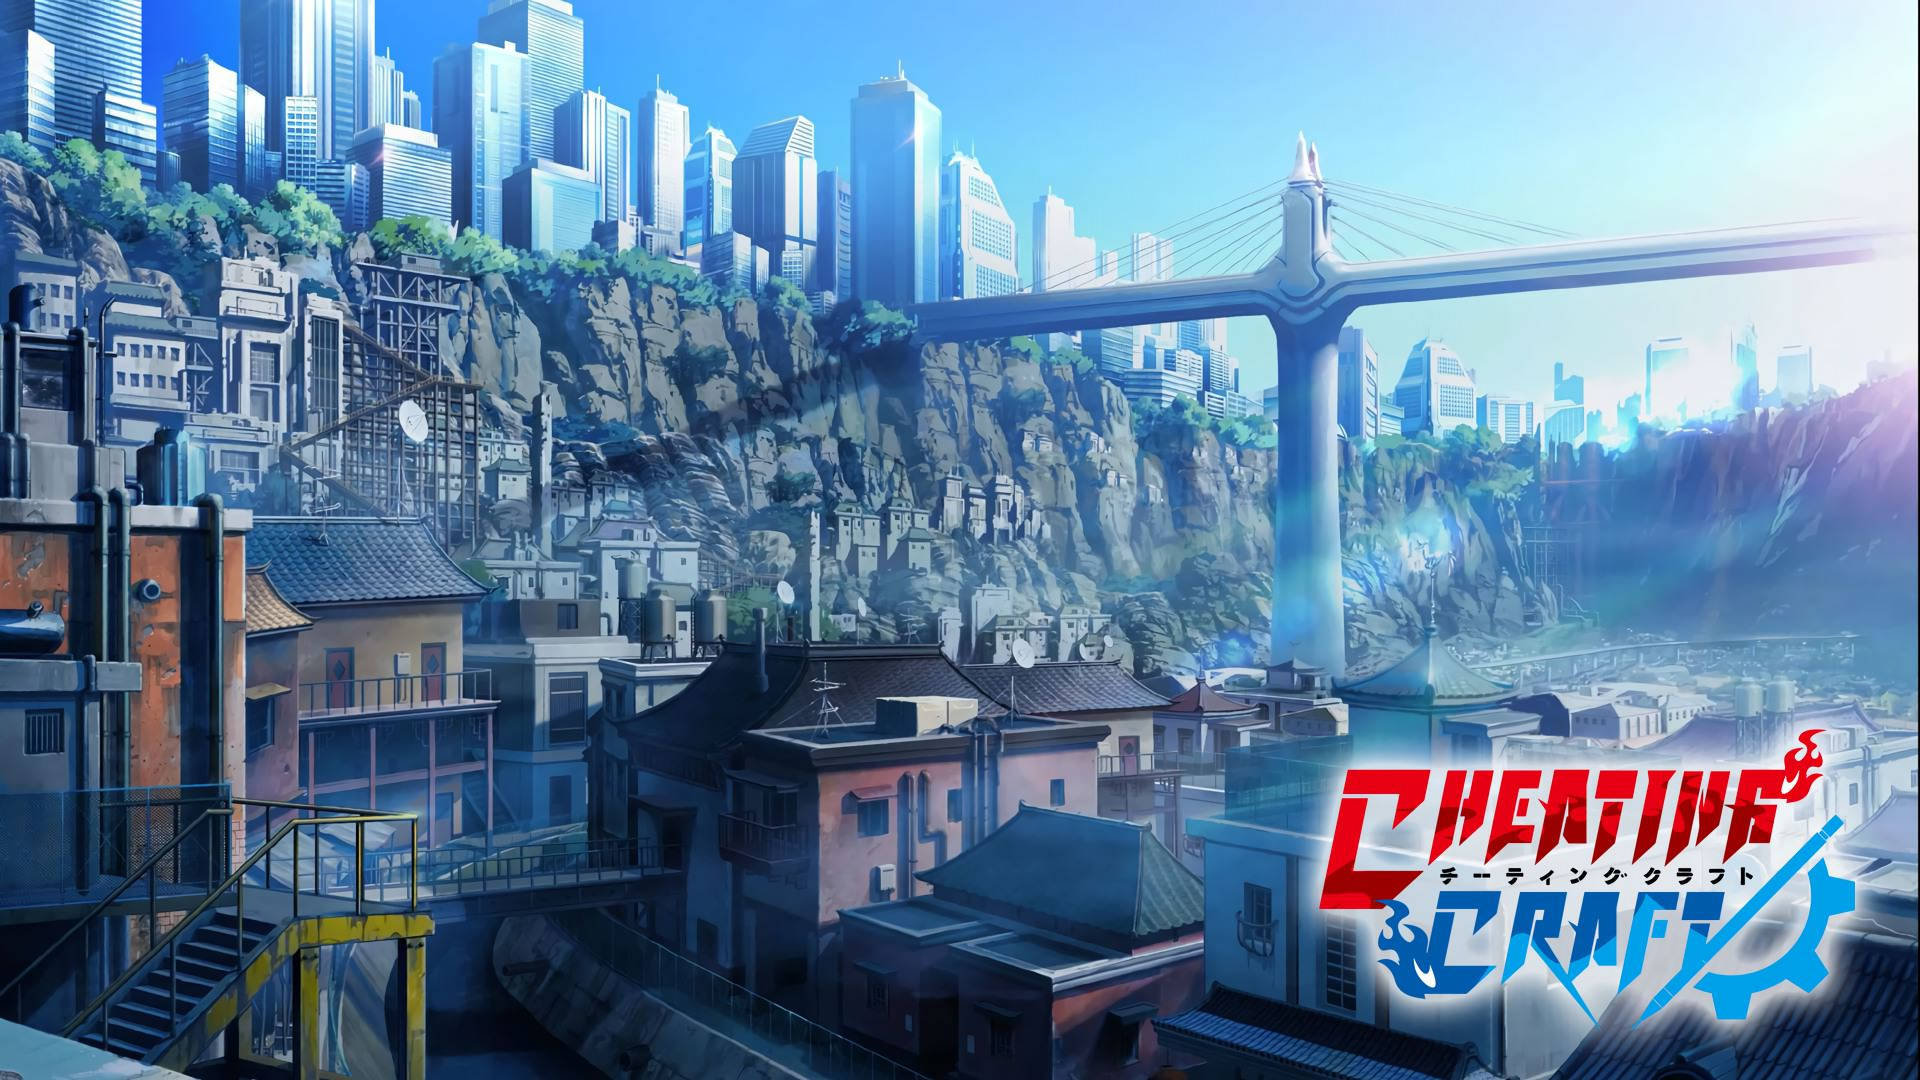 Explore the anime world of magical adventure and deception with Cheating Craft in Anime City Wallpaper